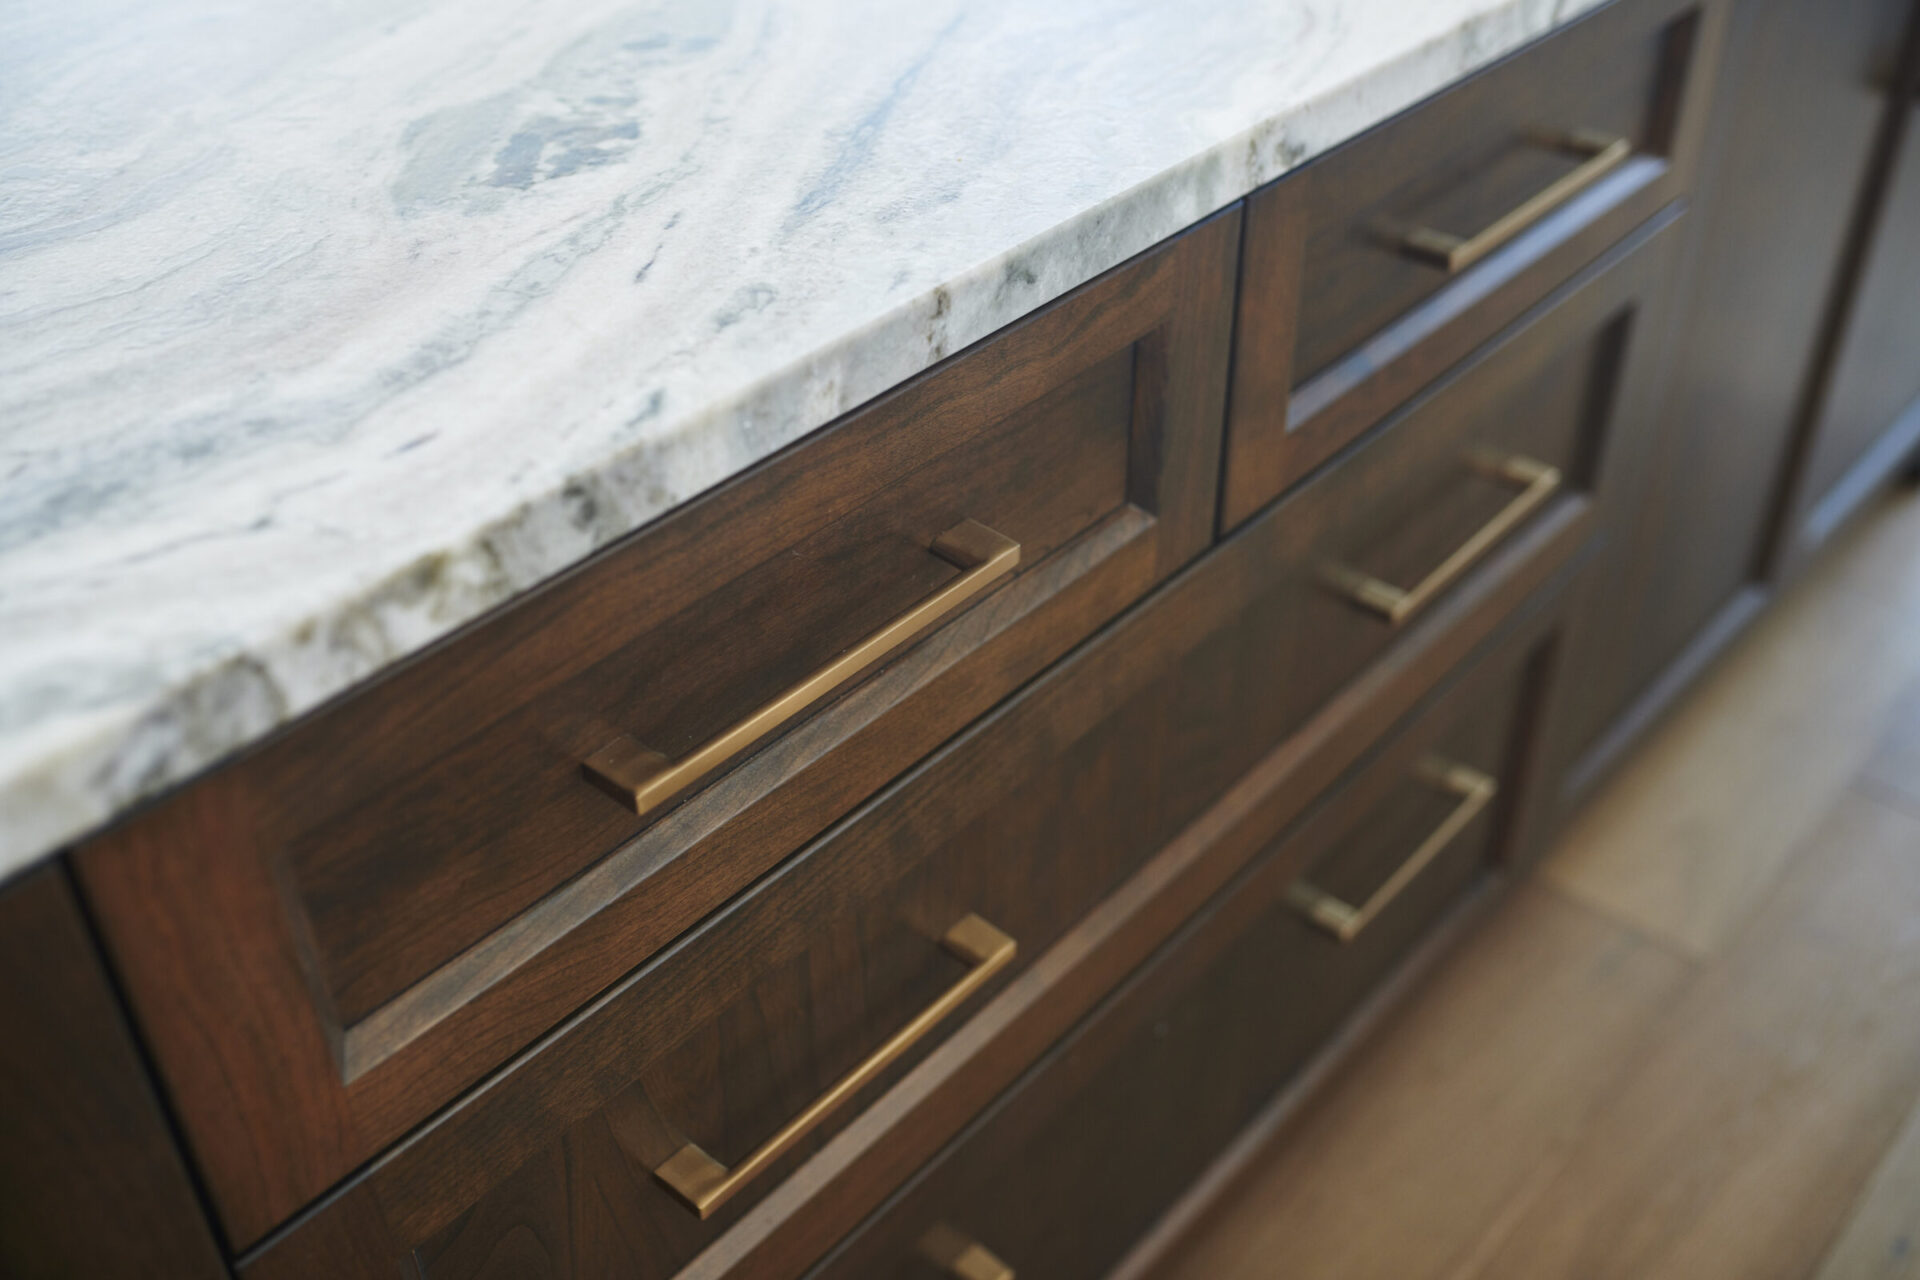 This image shows a close-up of a modern kitchen with wooden cabinets and metal handles, topped by a white marble countertop with grey veining.